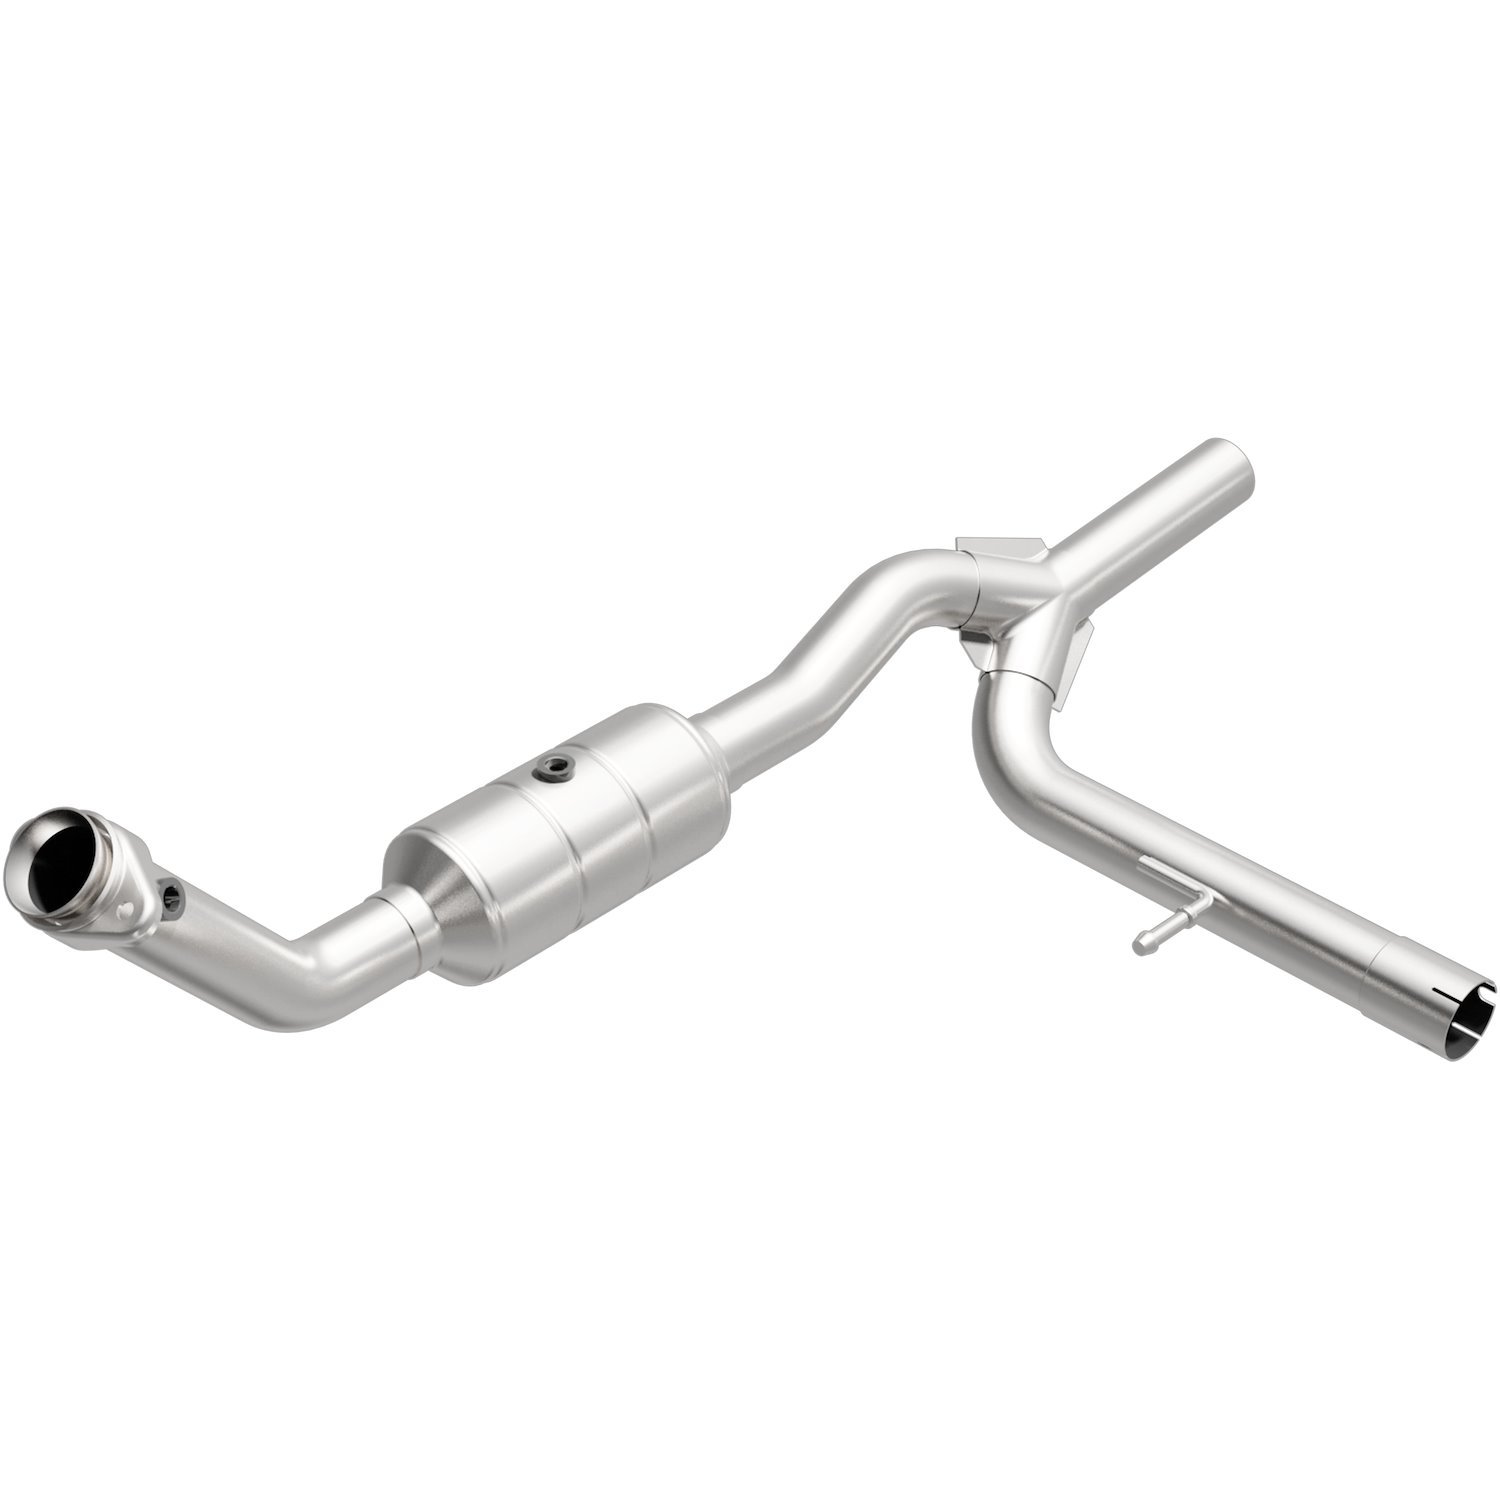 2004-2008 Ford F-150 OEM Grade Federal / EPA Compliant Direct-Fit Catalytic Converter